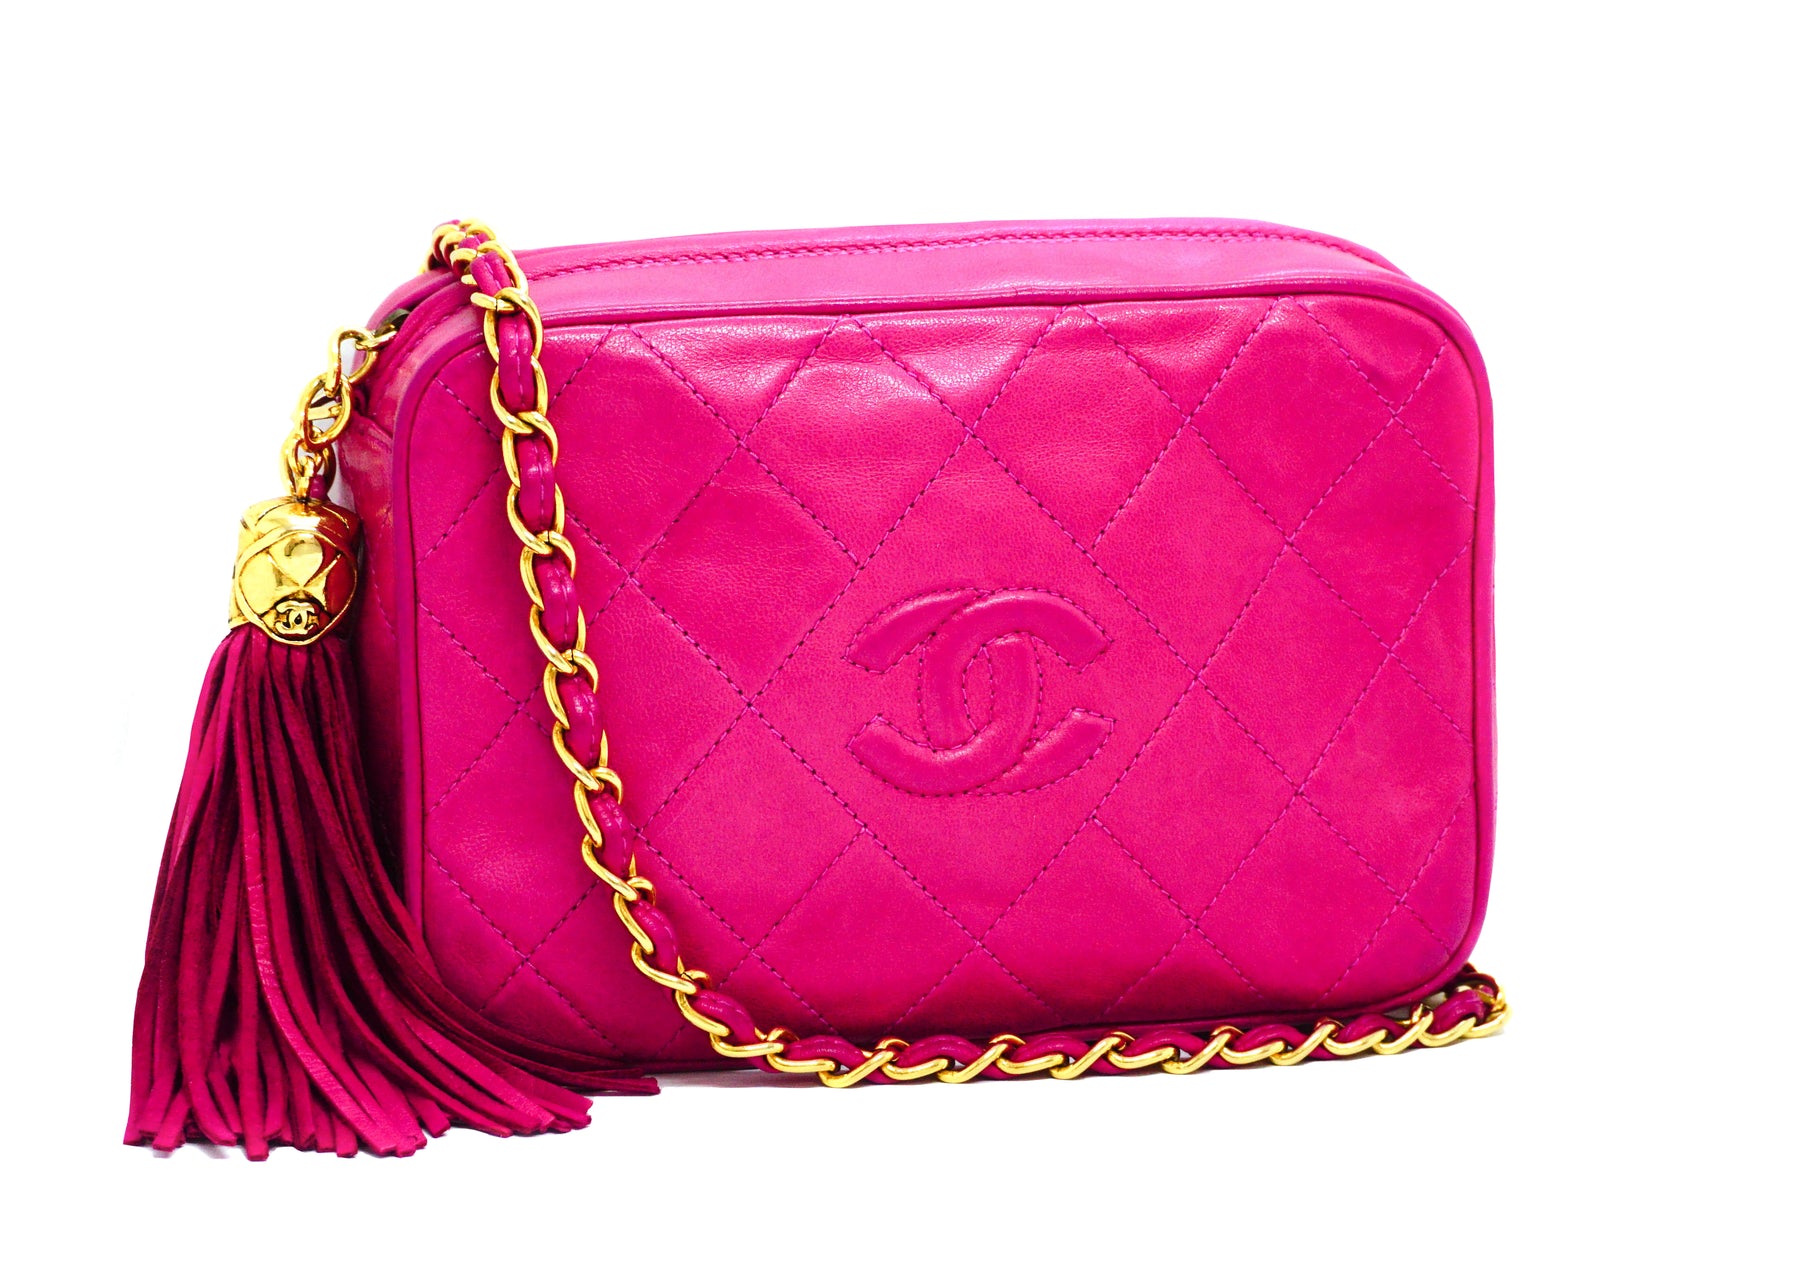 Chanel Vintage Pink Rare Lambskin Camera Bag – Classic Coco